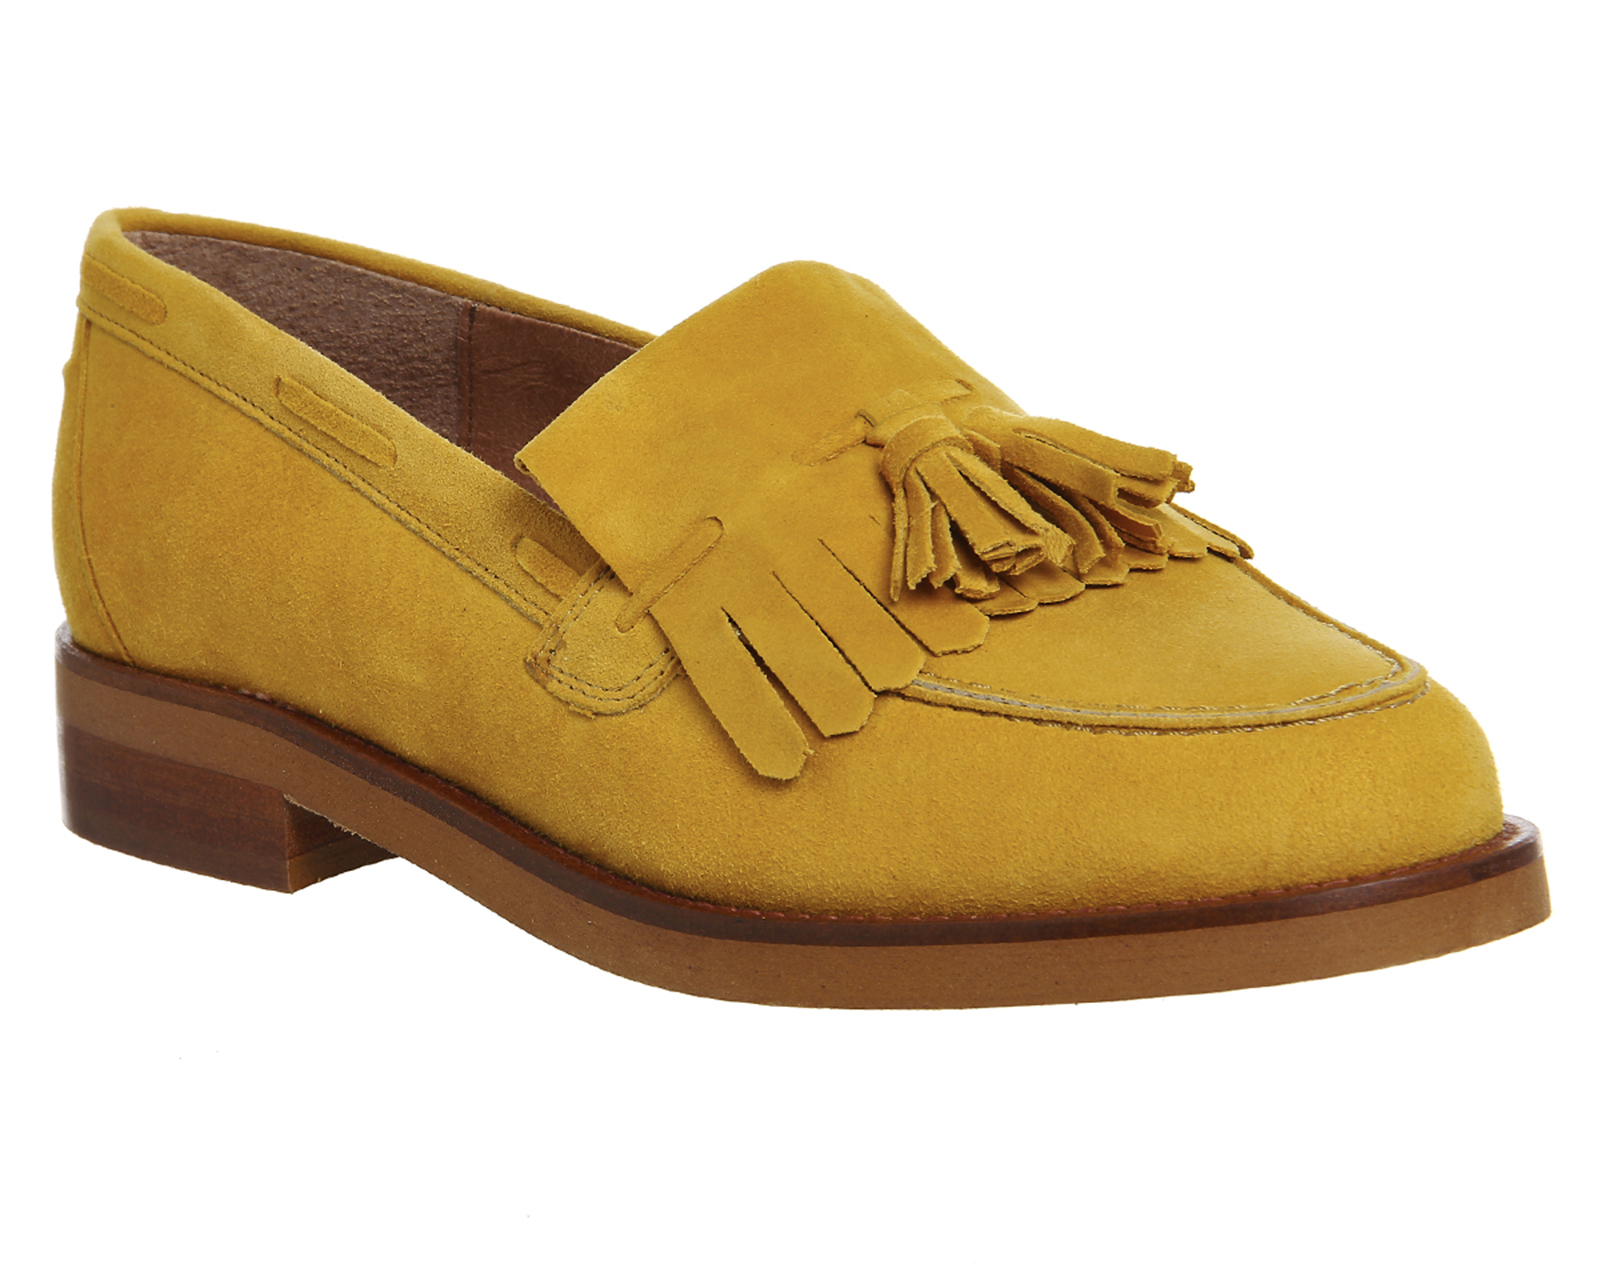 mustard yellow loafers